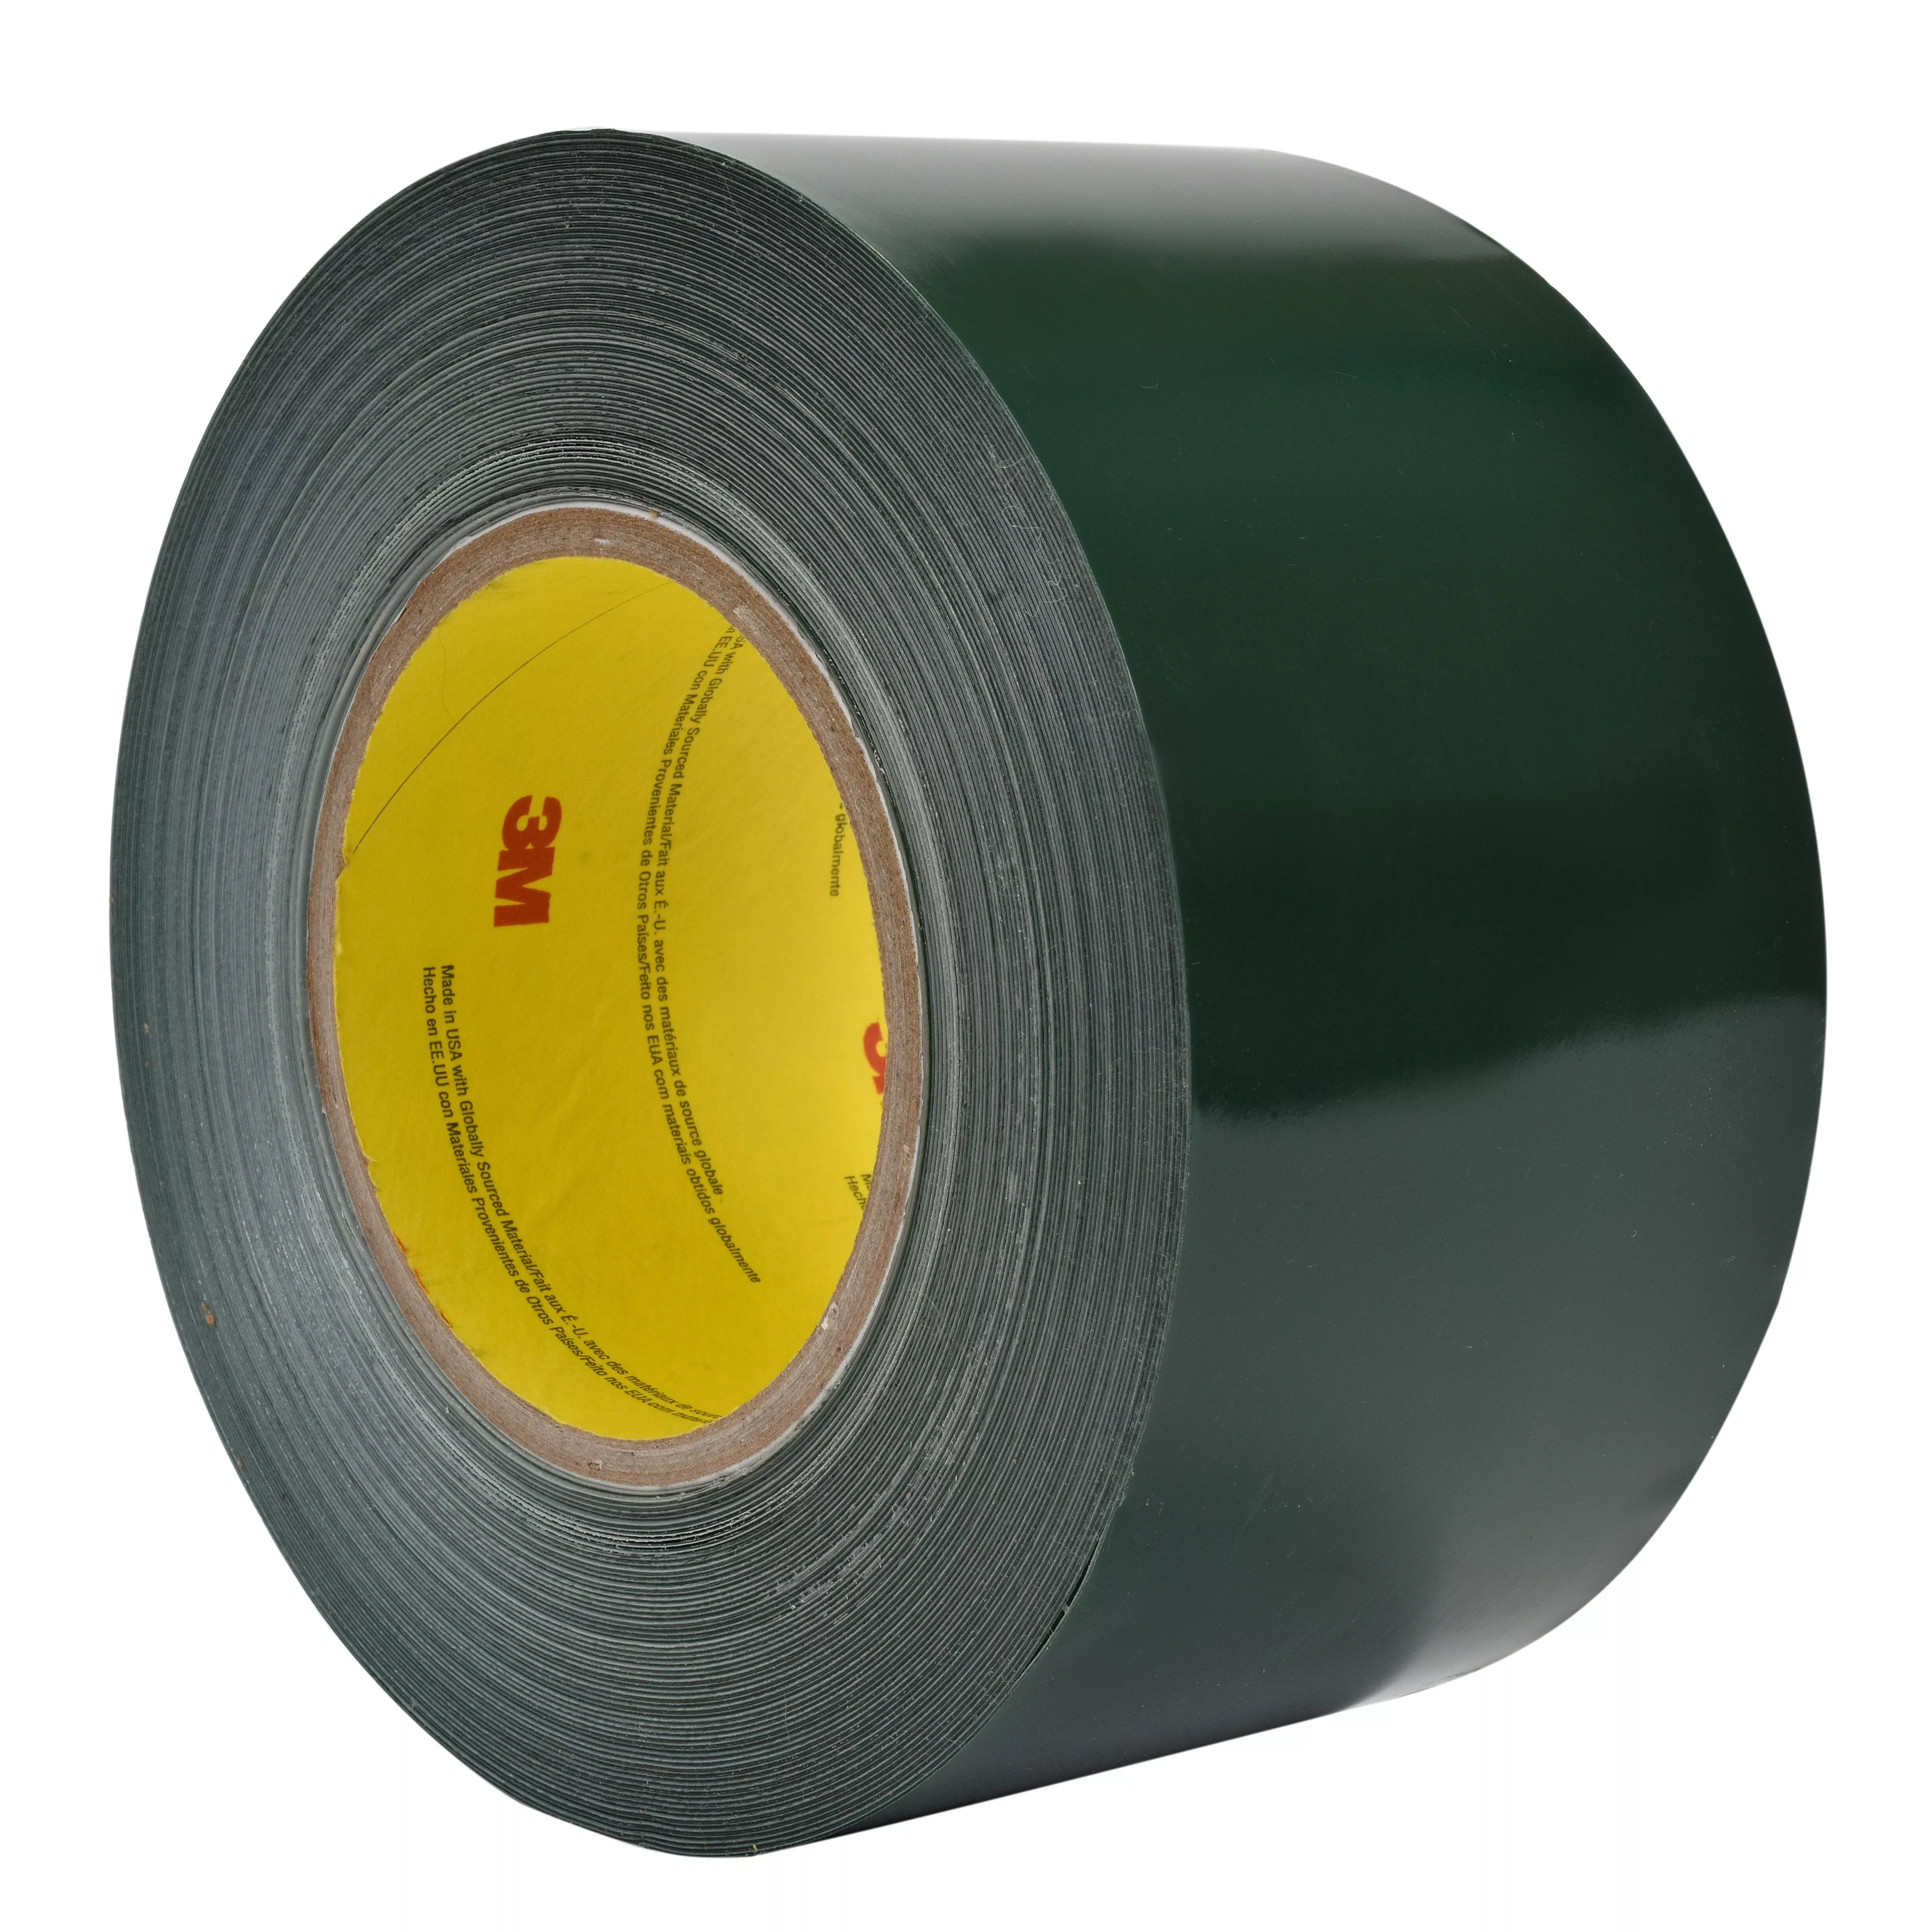 SKU 7010336120 | 3M™ Sealing and Holding Tape 8069